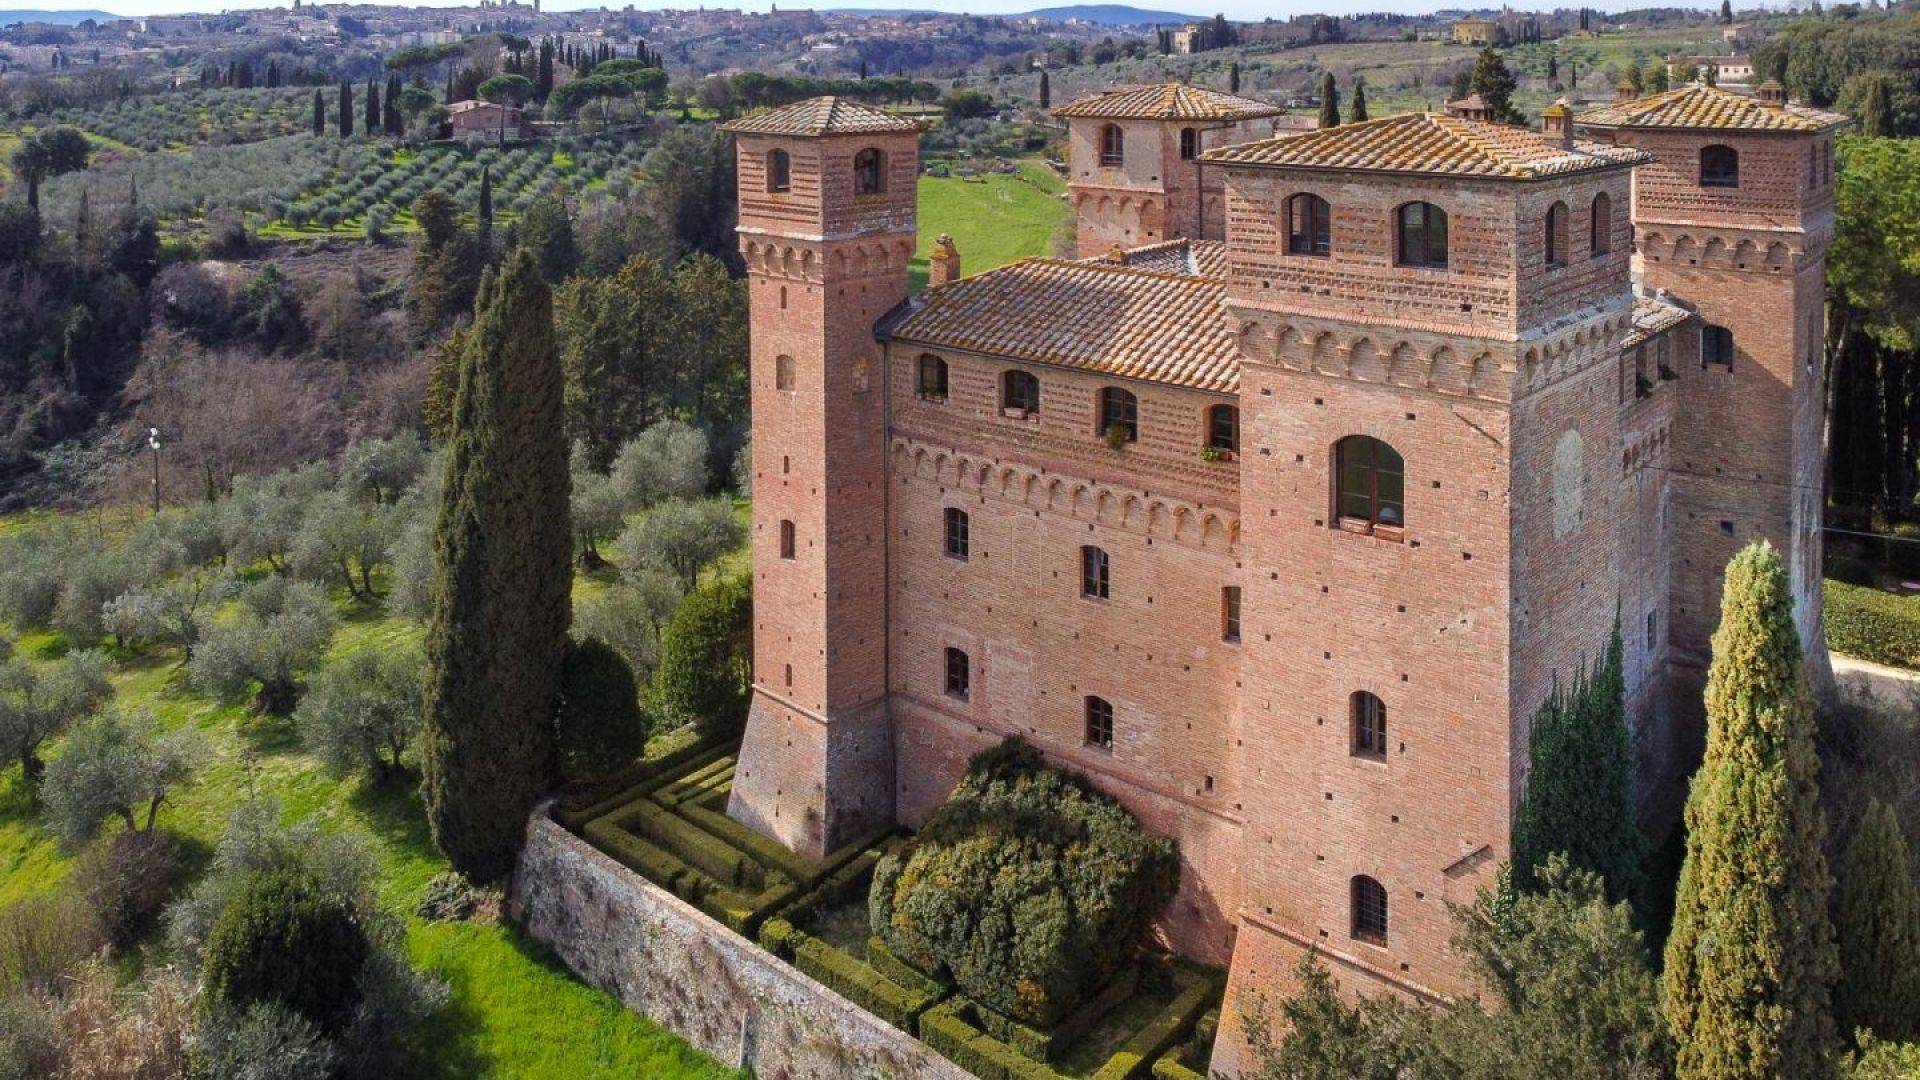 Remarkable and 'one-of-a-kind' property with a medieval castle featuring spectacular views of the city of Siena on sale in Tuscany.